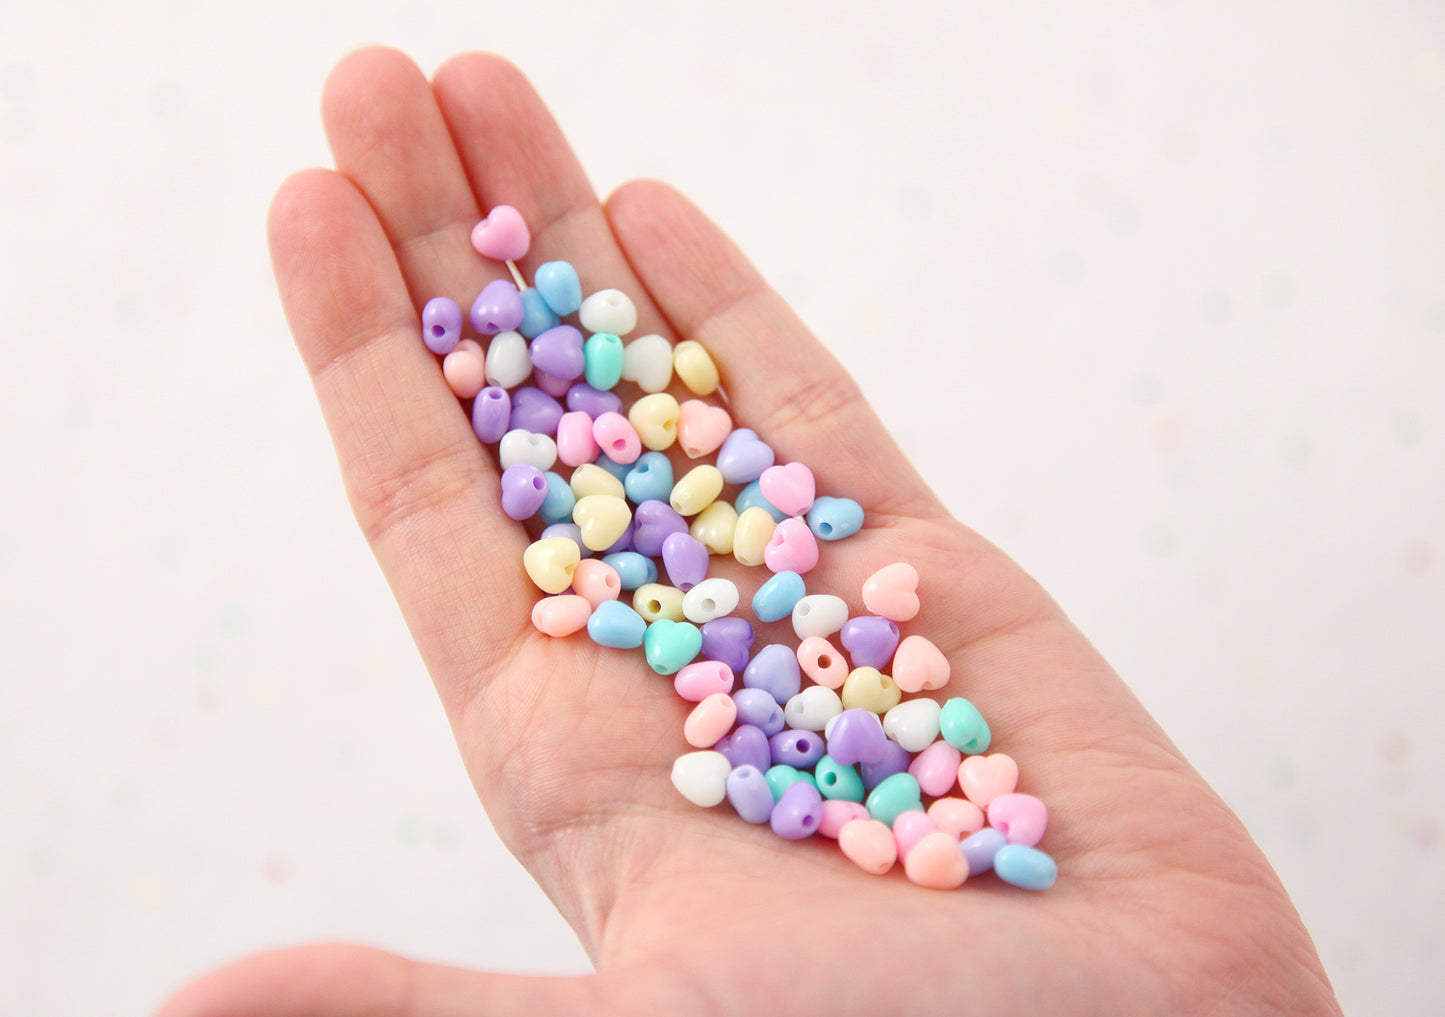 Pastel Heart Beads - 7mm Super Tiny Plastic Pastel Heart Resin or Acrylic Beads - 200 pc set